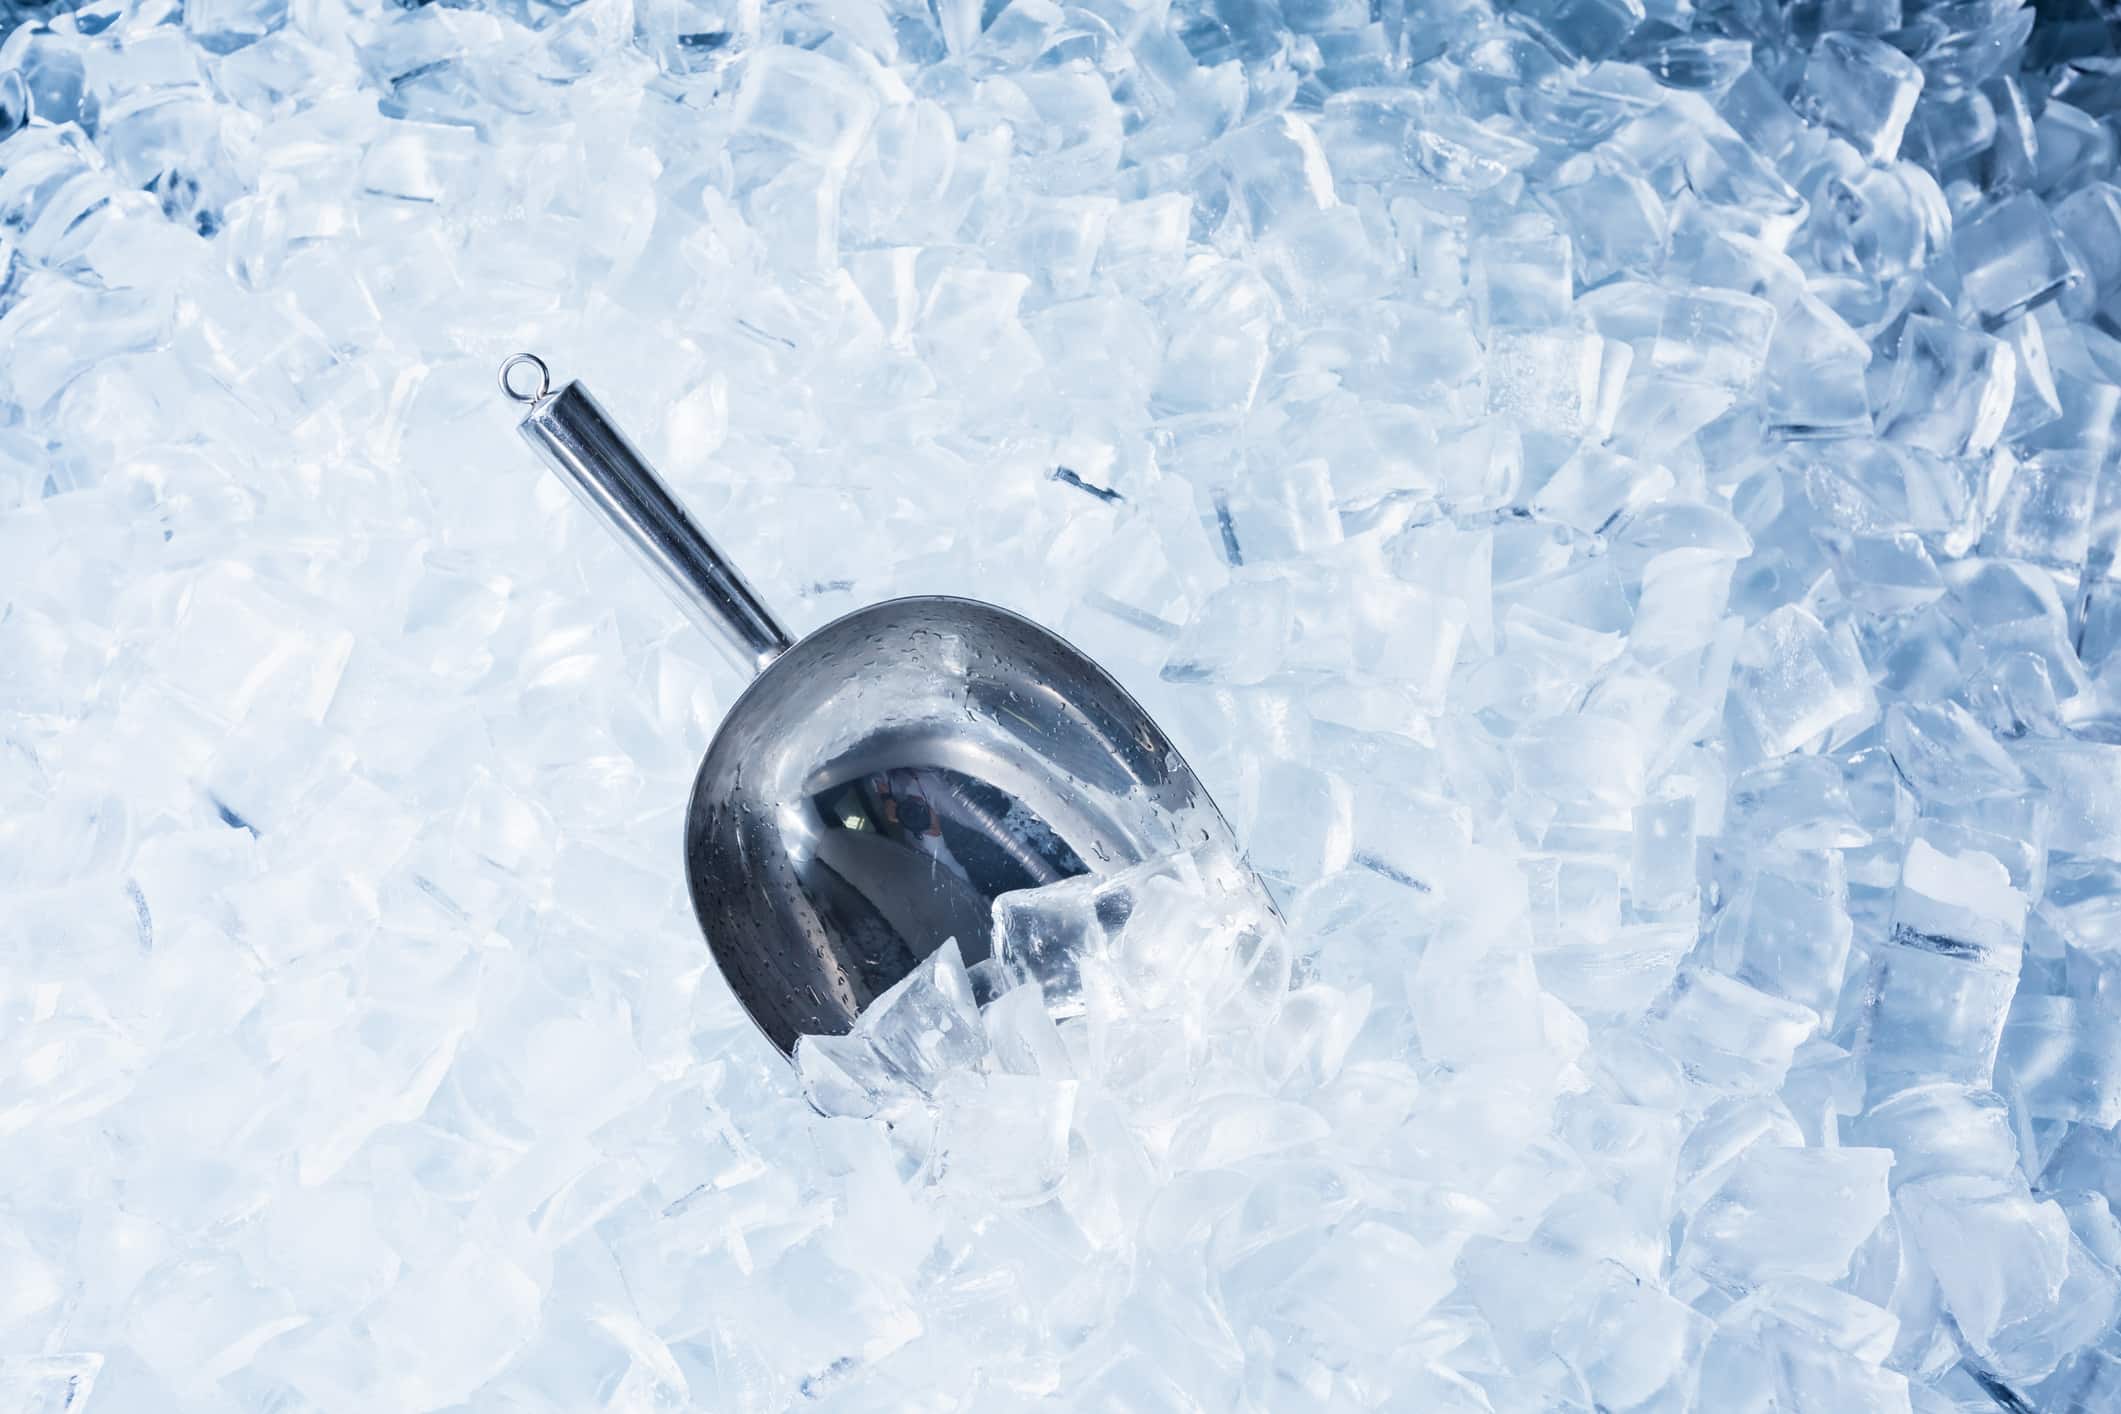 US Consumer Product Safety Commission on X: #RECALL: @GeviHousehold  Countertop Nugget Ice Makers. The metal blades of the ice maker's auger can  break into small pieces in the ice bucket, posing a